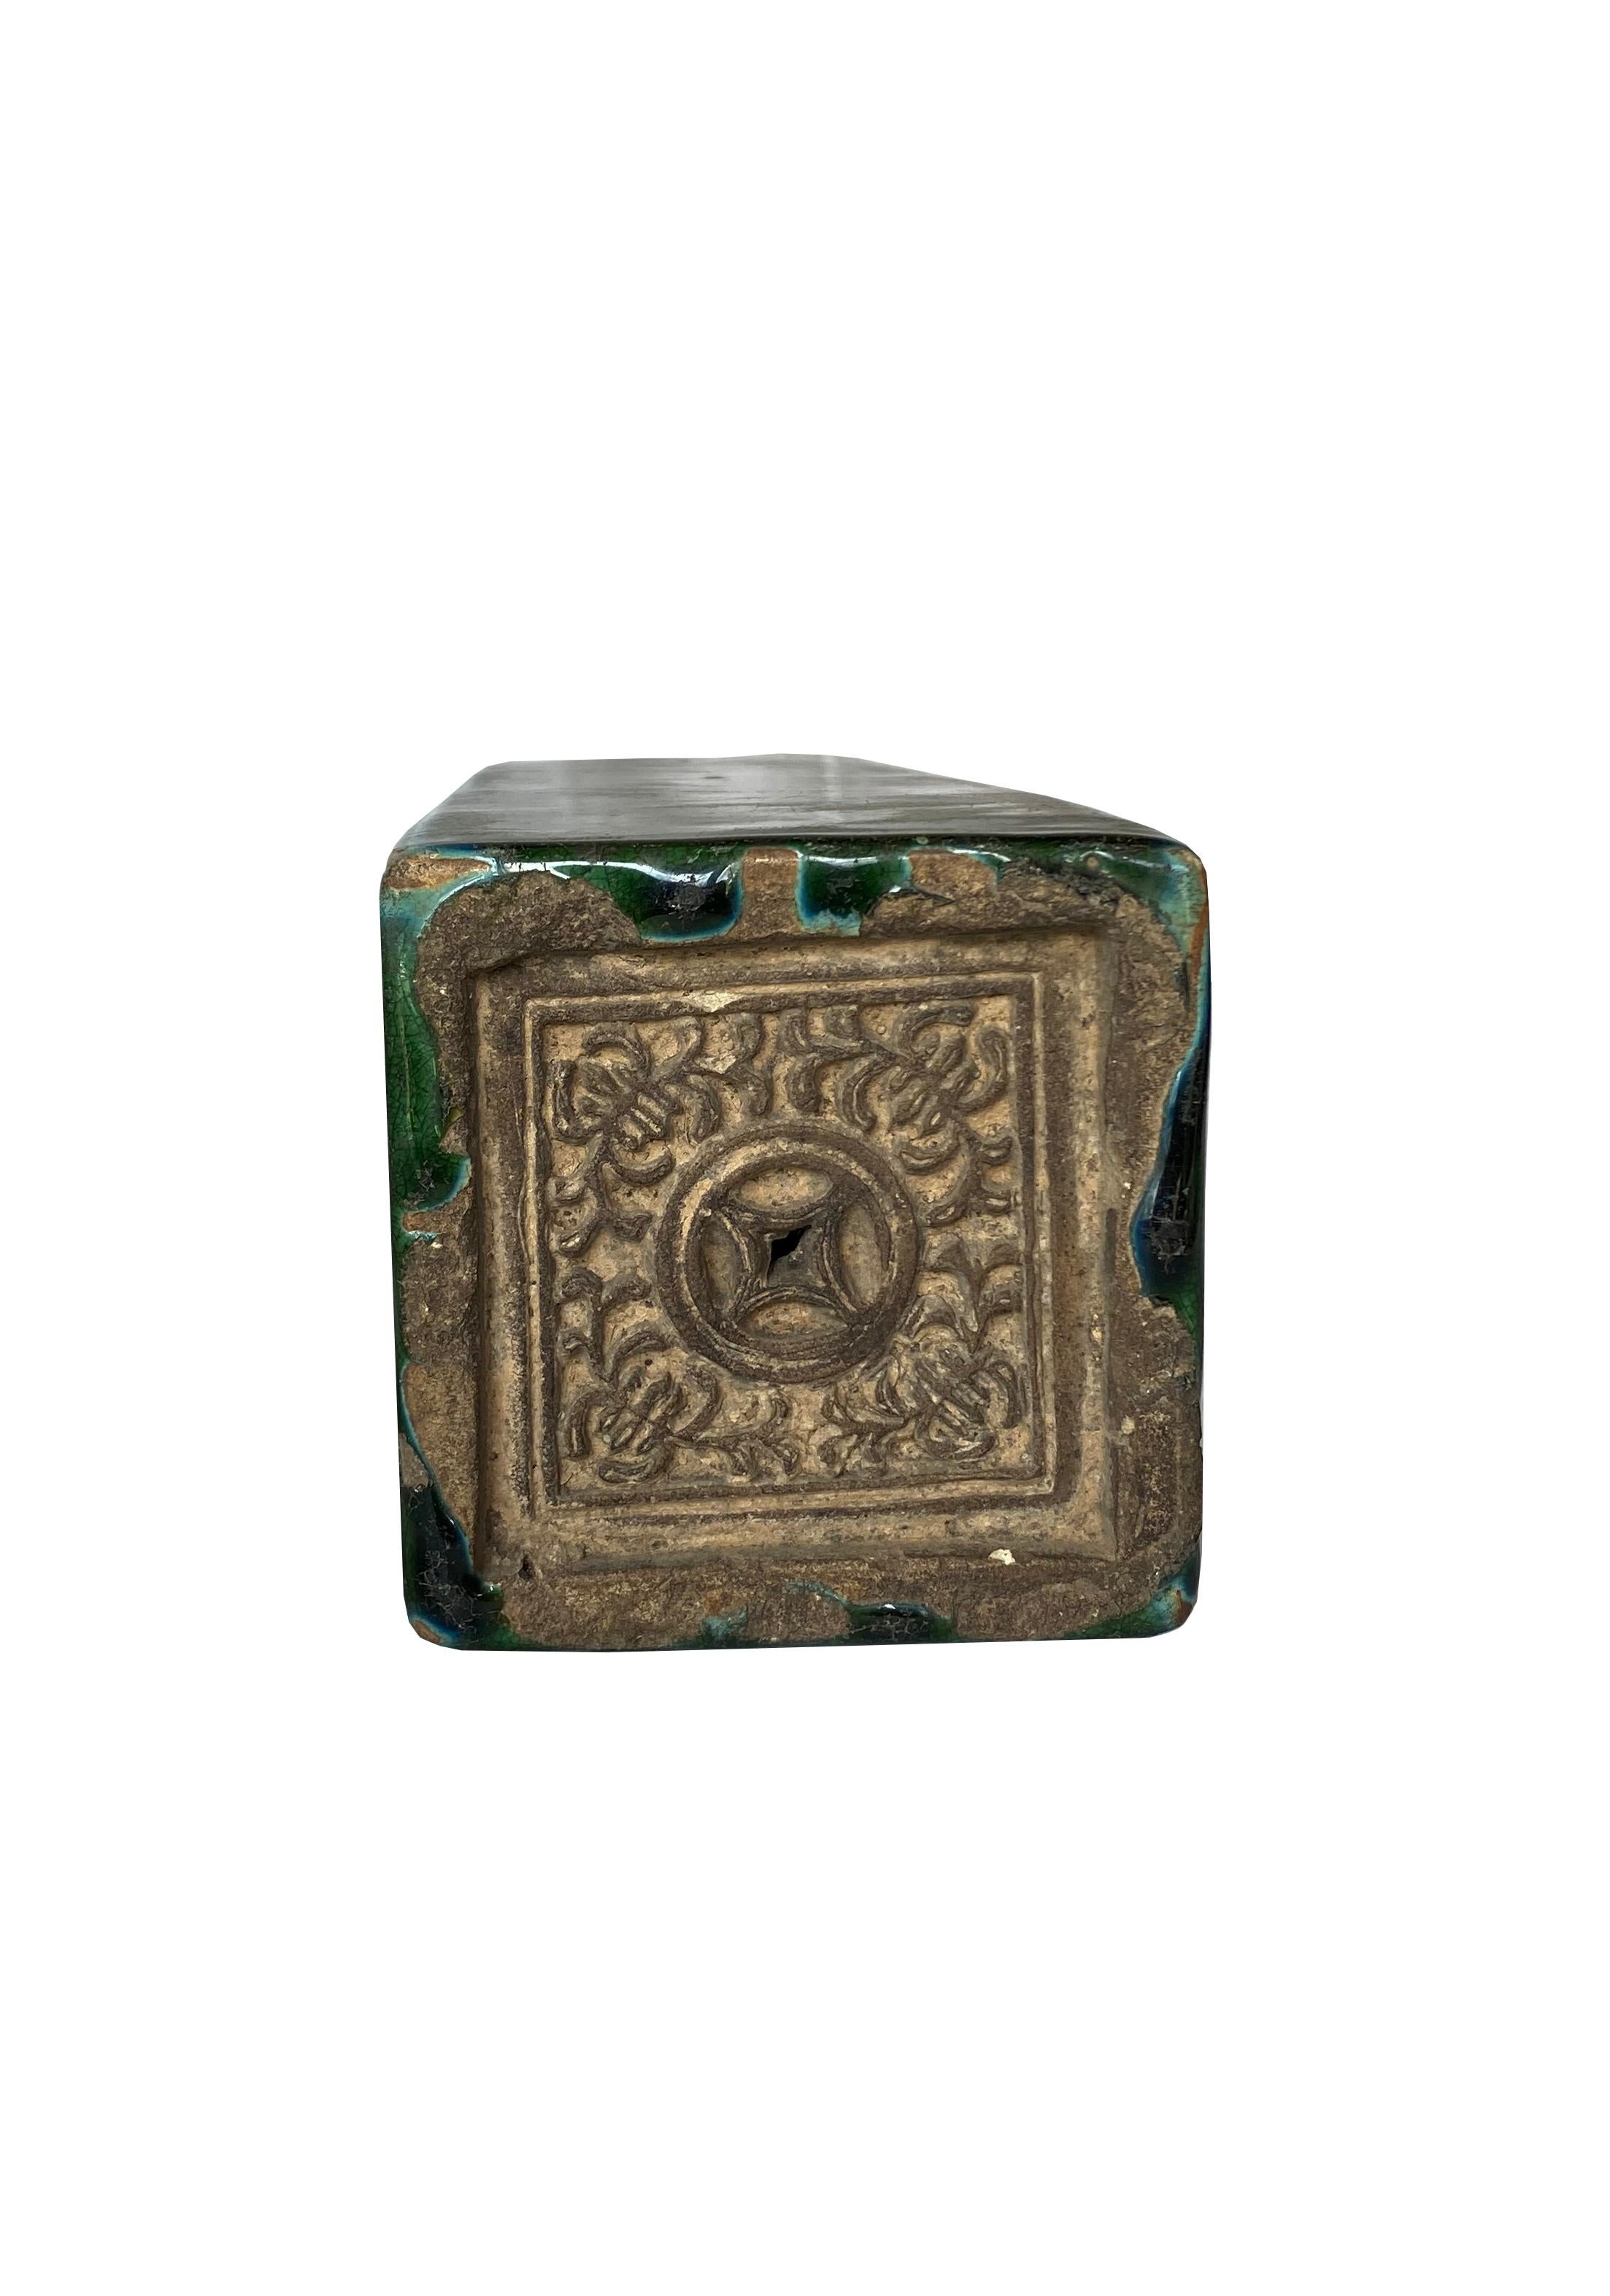 Ceramic  Chinese ceramic Green Glazed 'Shiwan' Opium Pillow, Early 20th Century For Sale